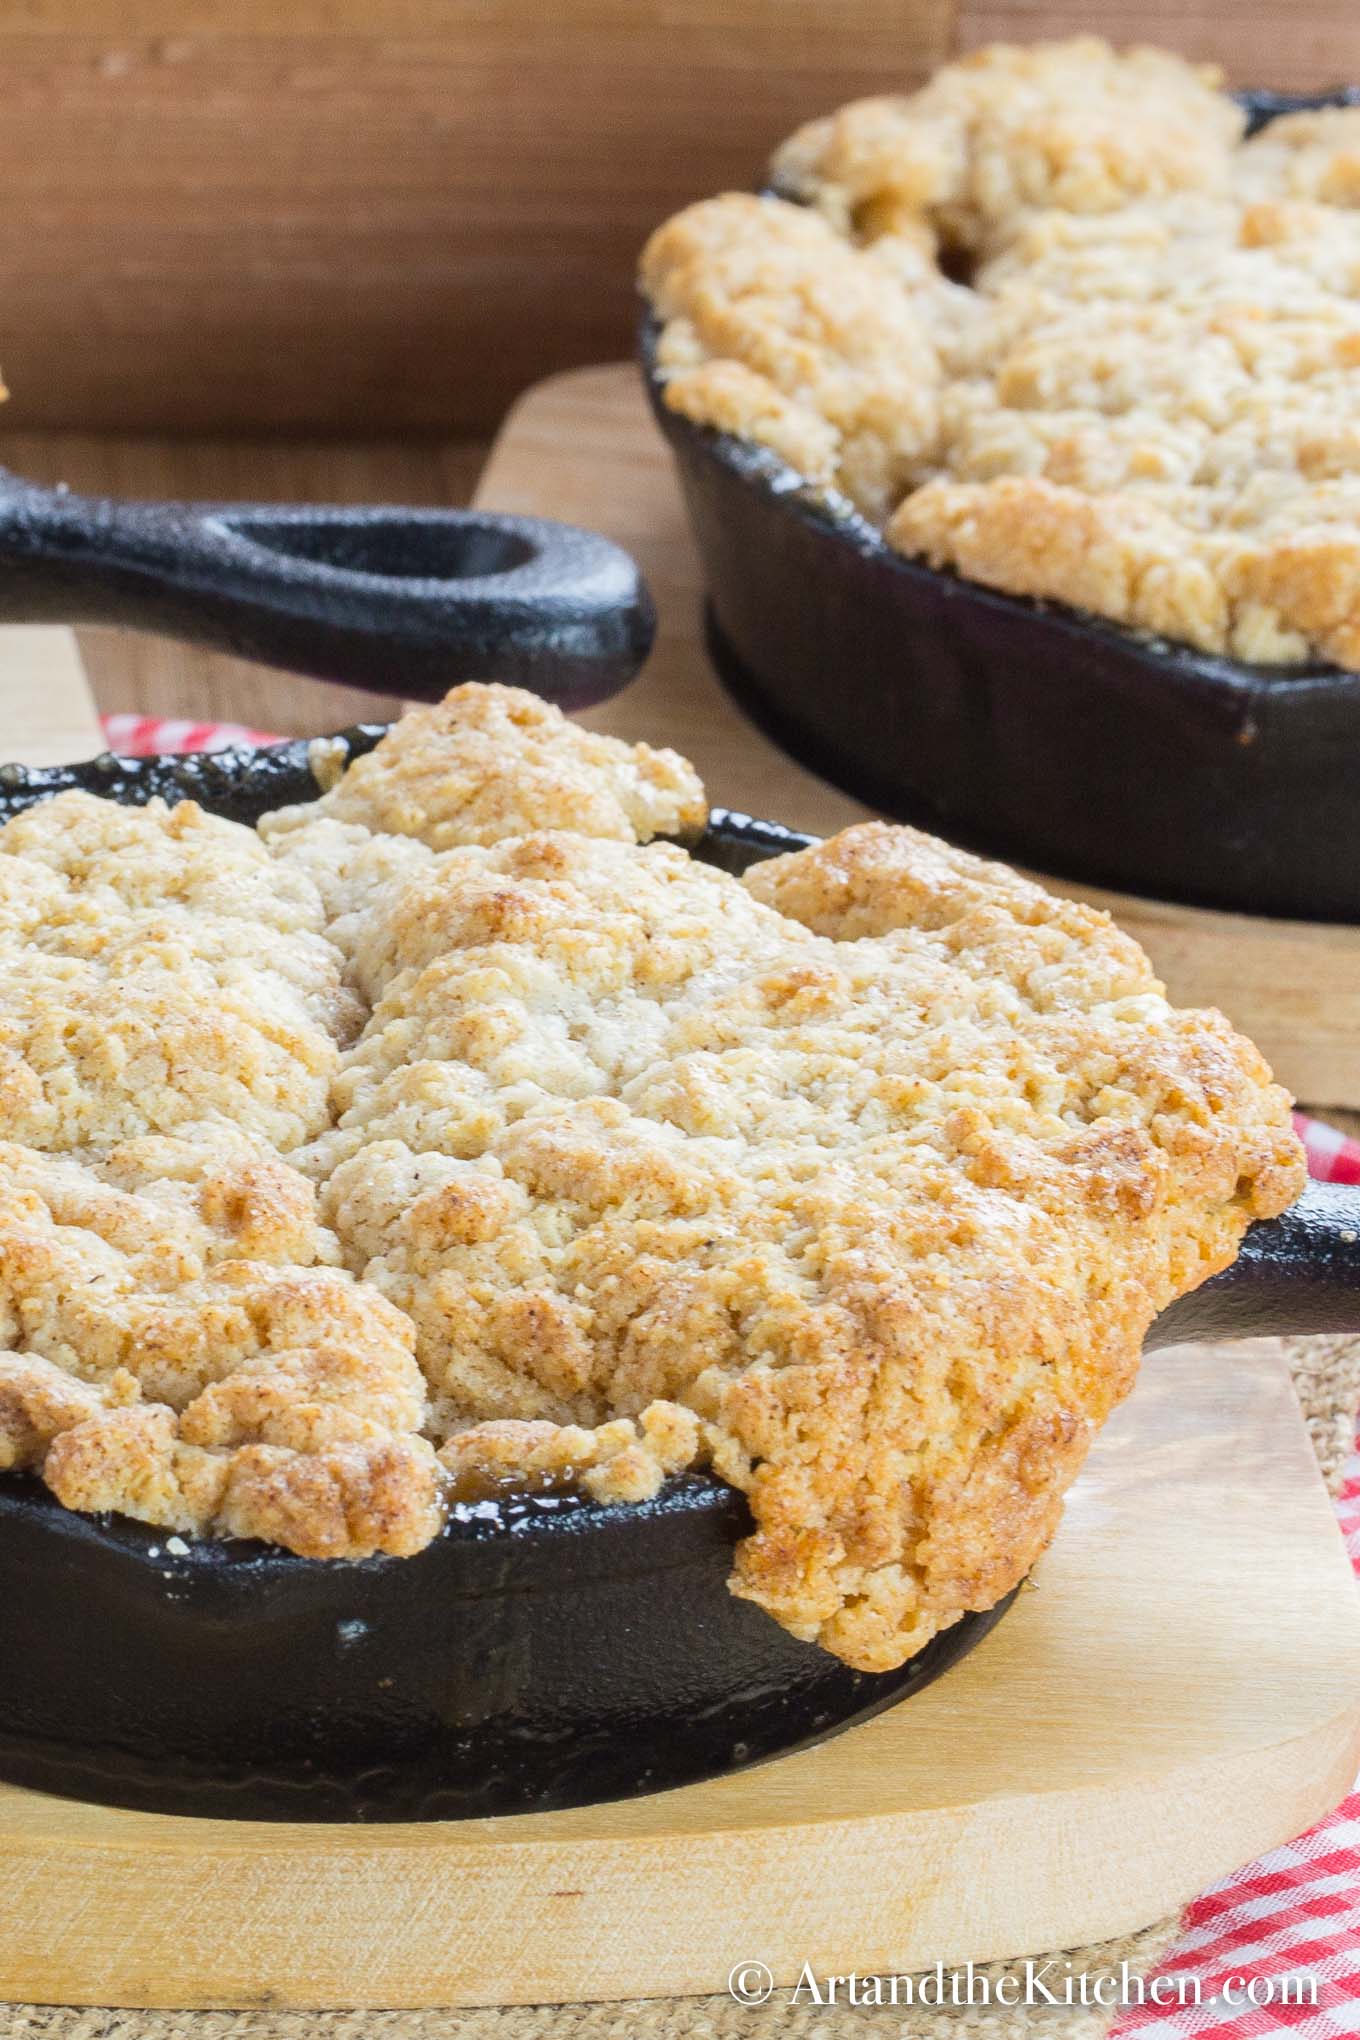 Cinnamon apple filling with a golden brown, buttery crisp topping served in individual cast iron pans on wood plates.